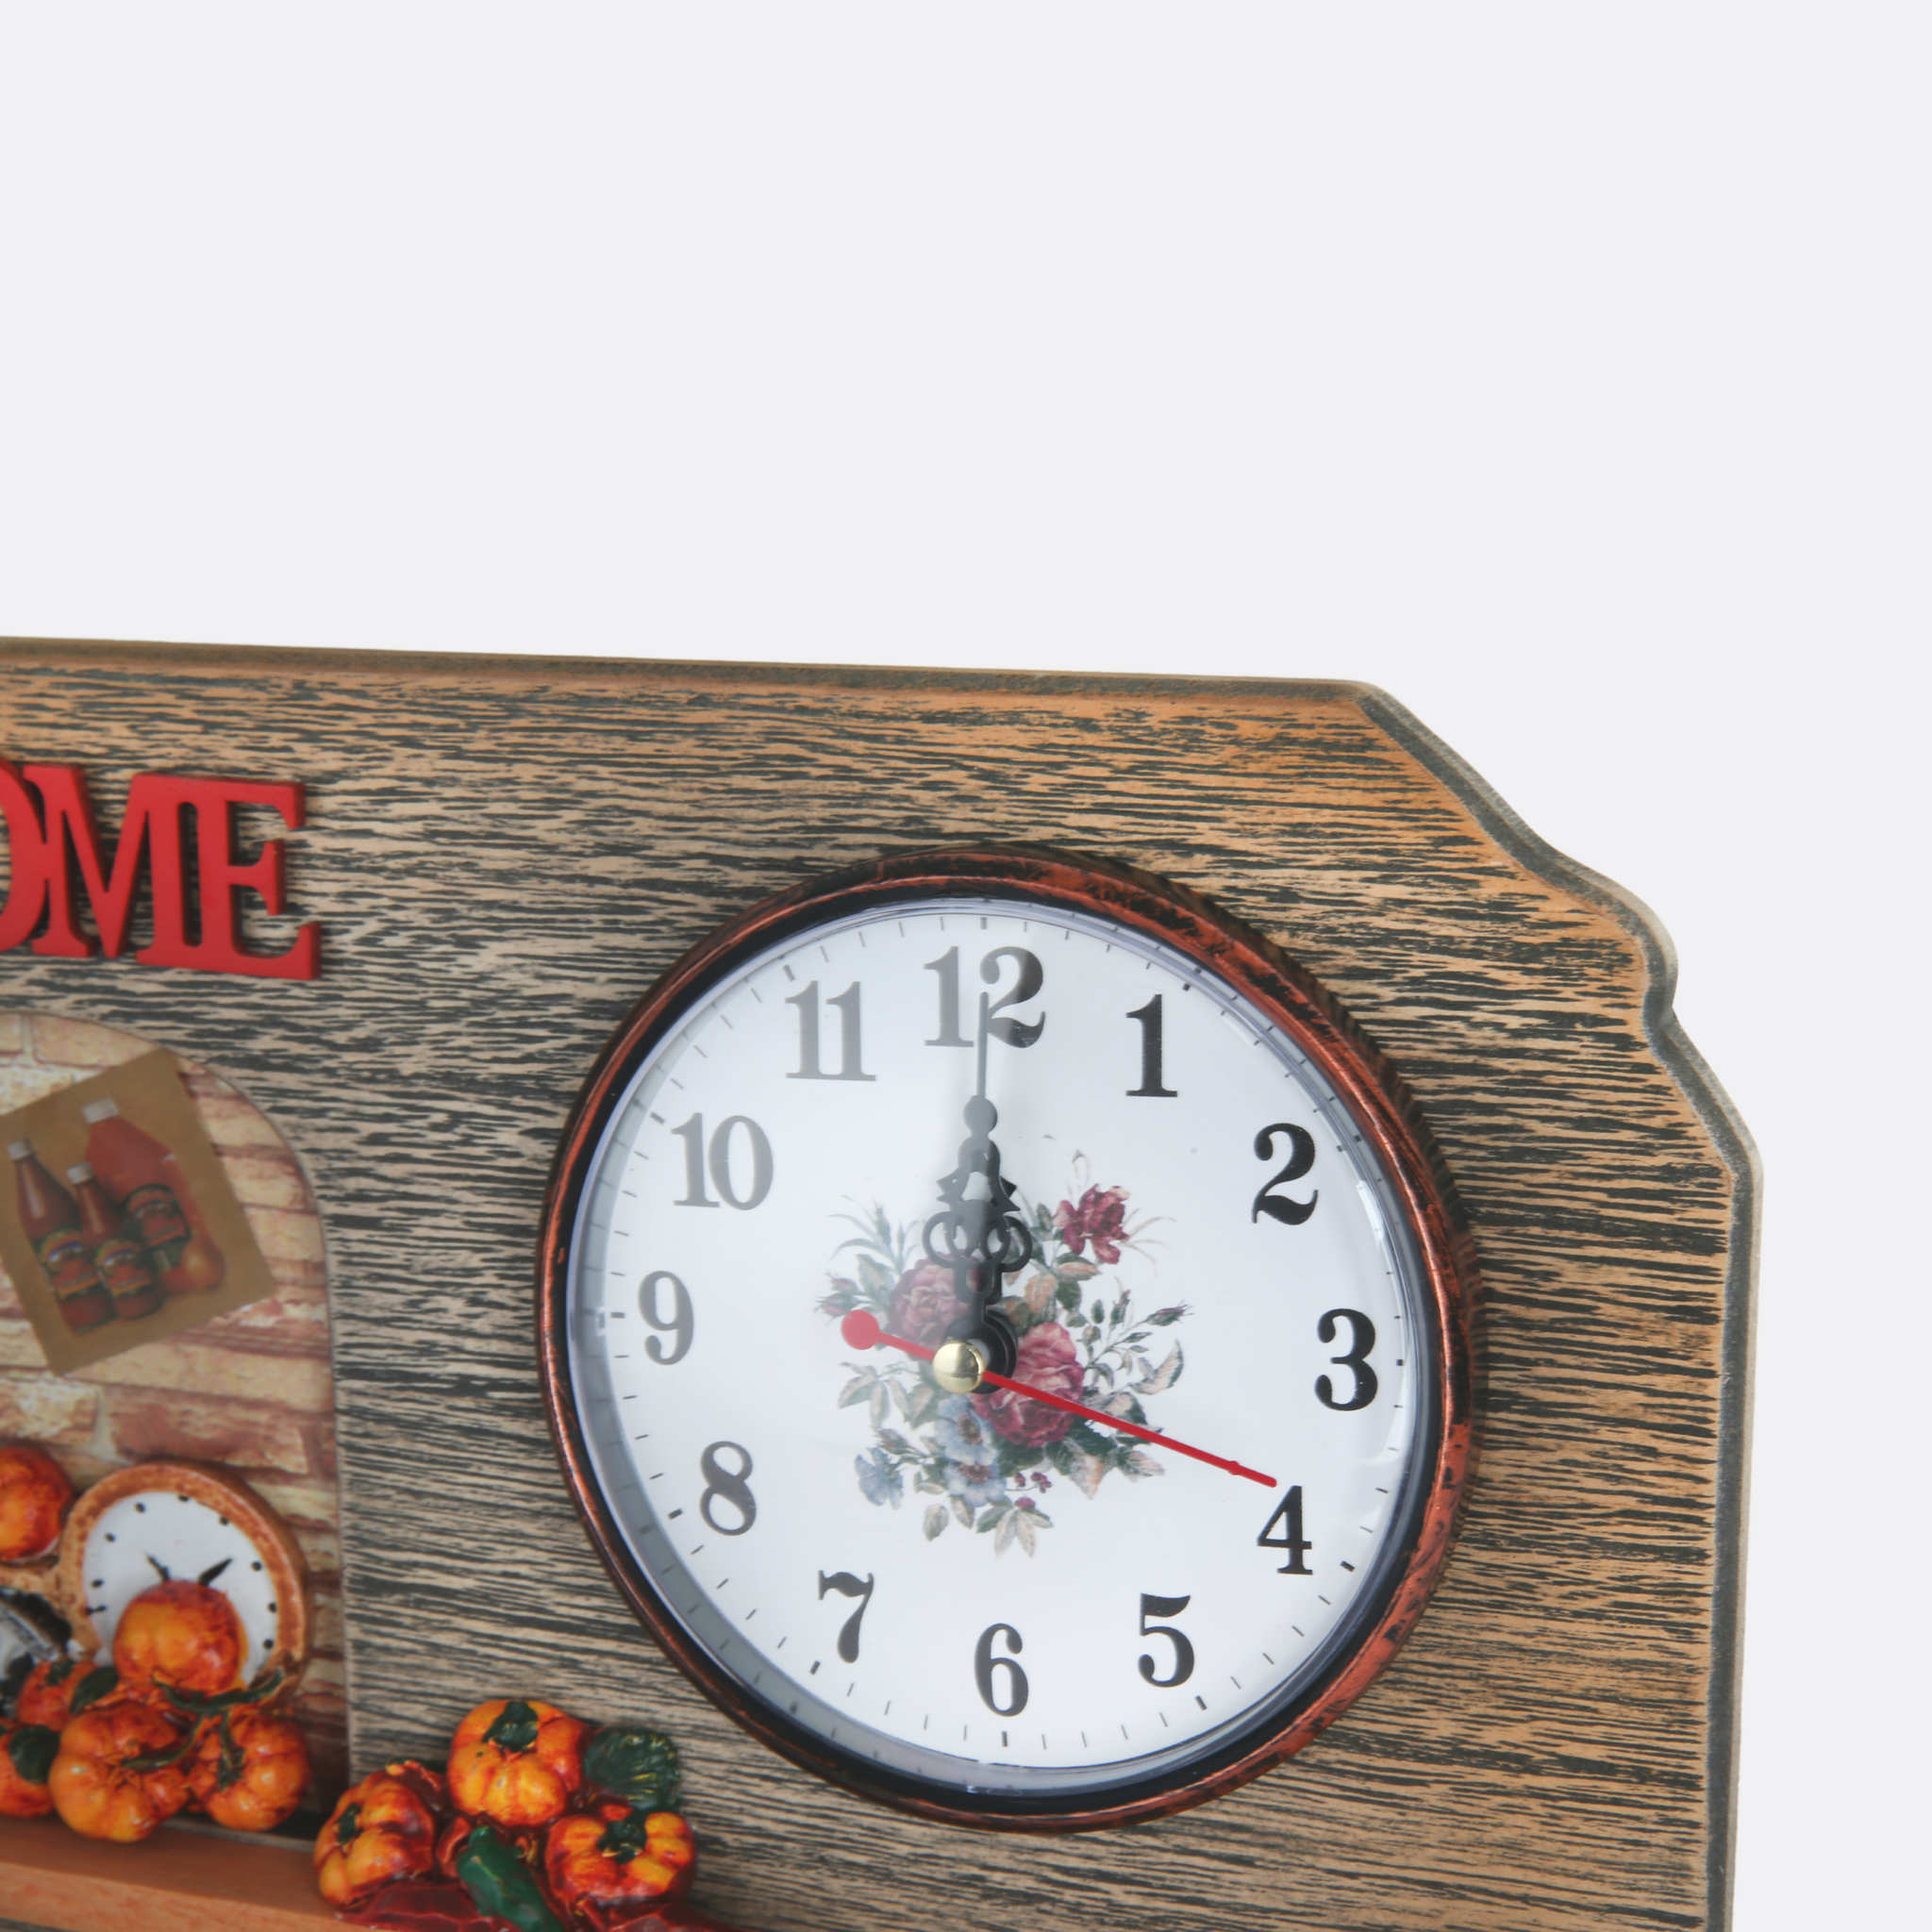 Home Key Holder With Clock